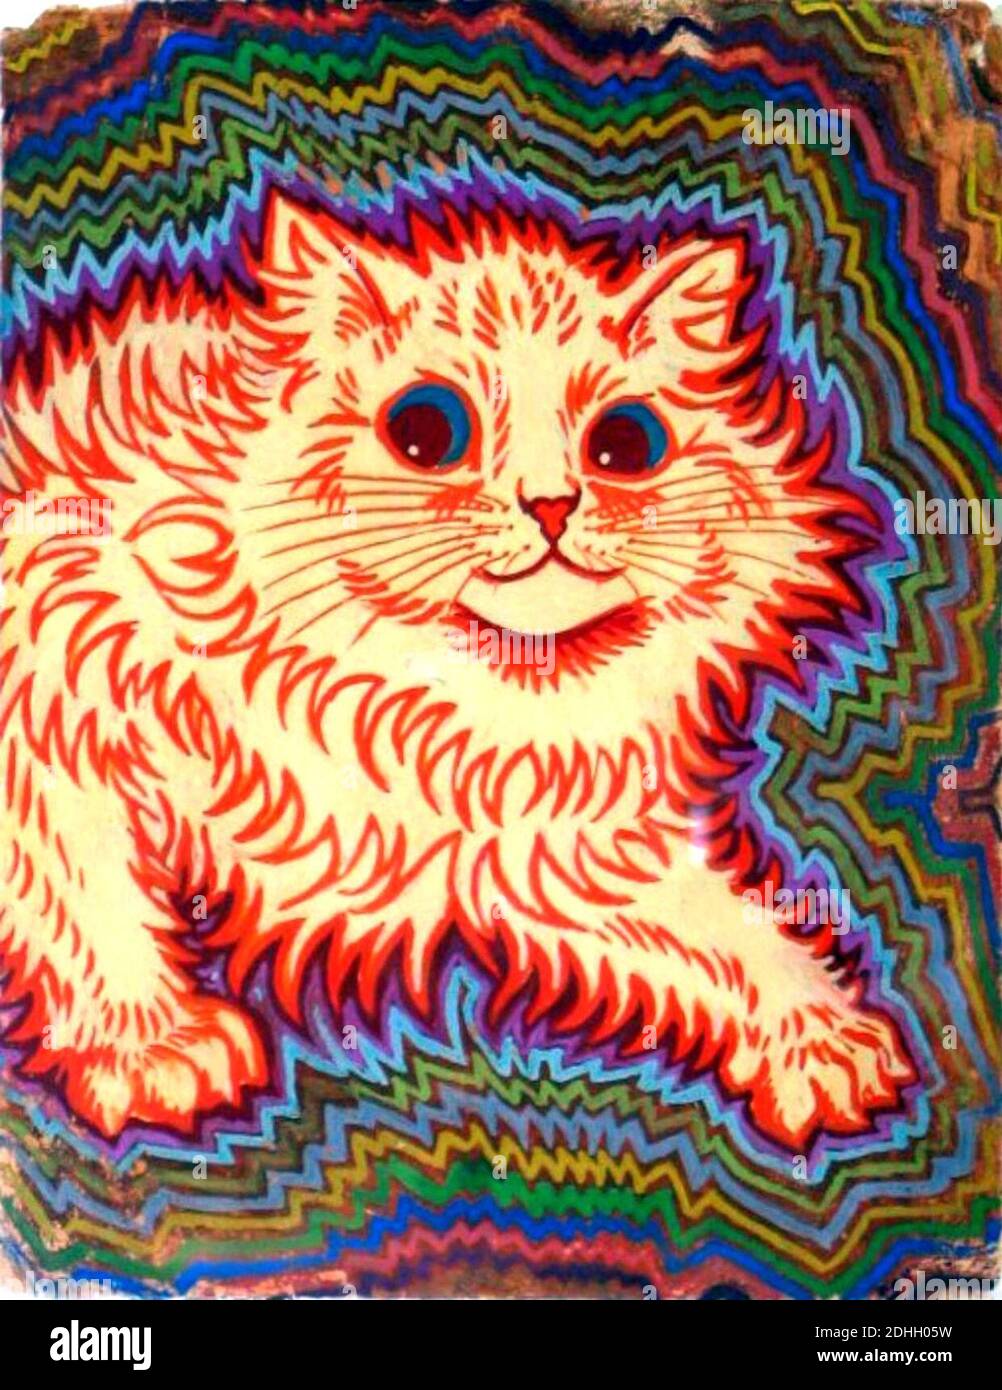 L. Wain's psychedelic cat. Stock Photo